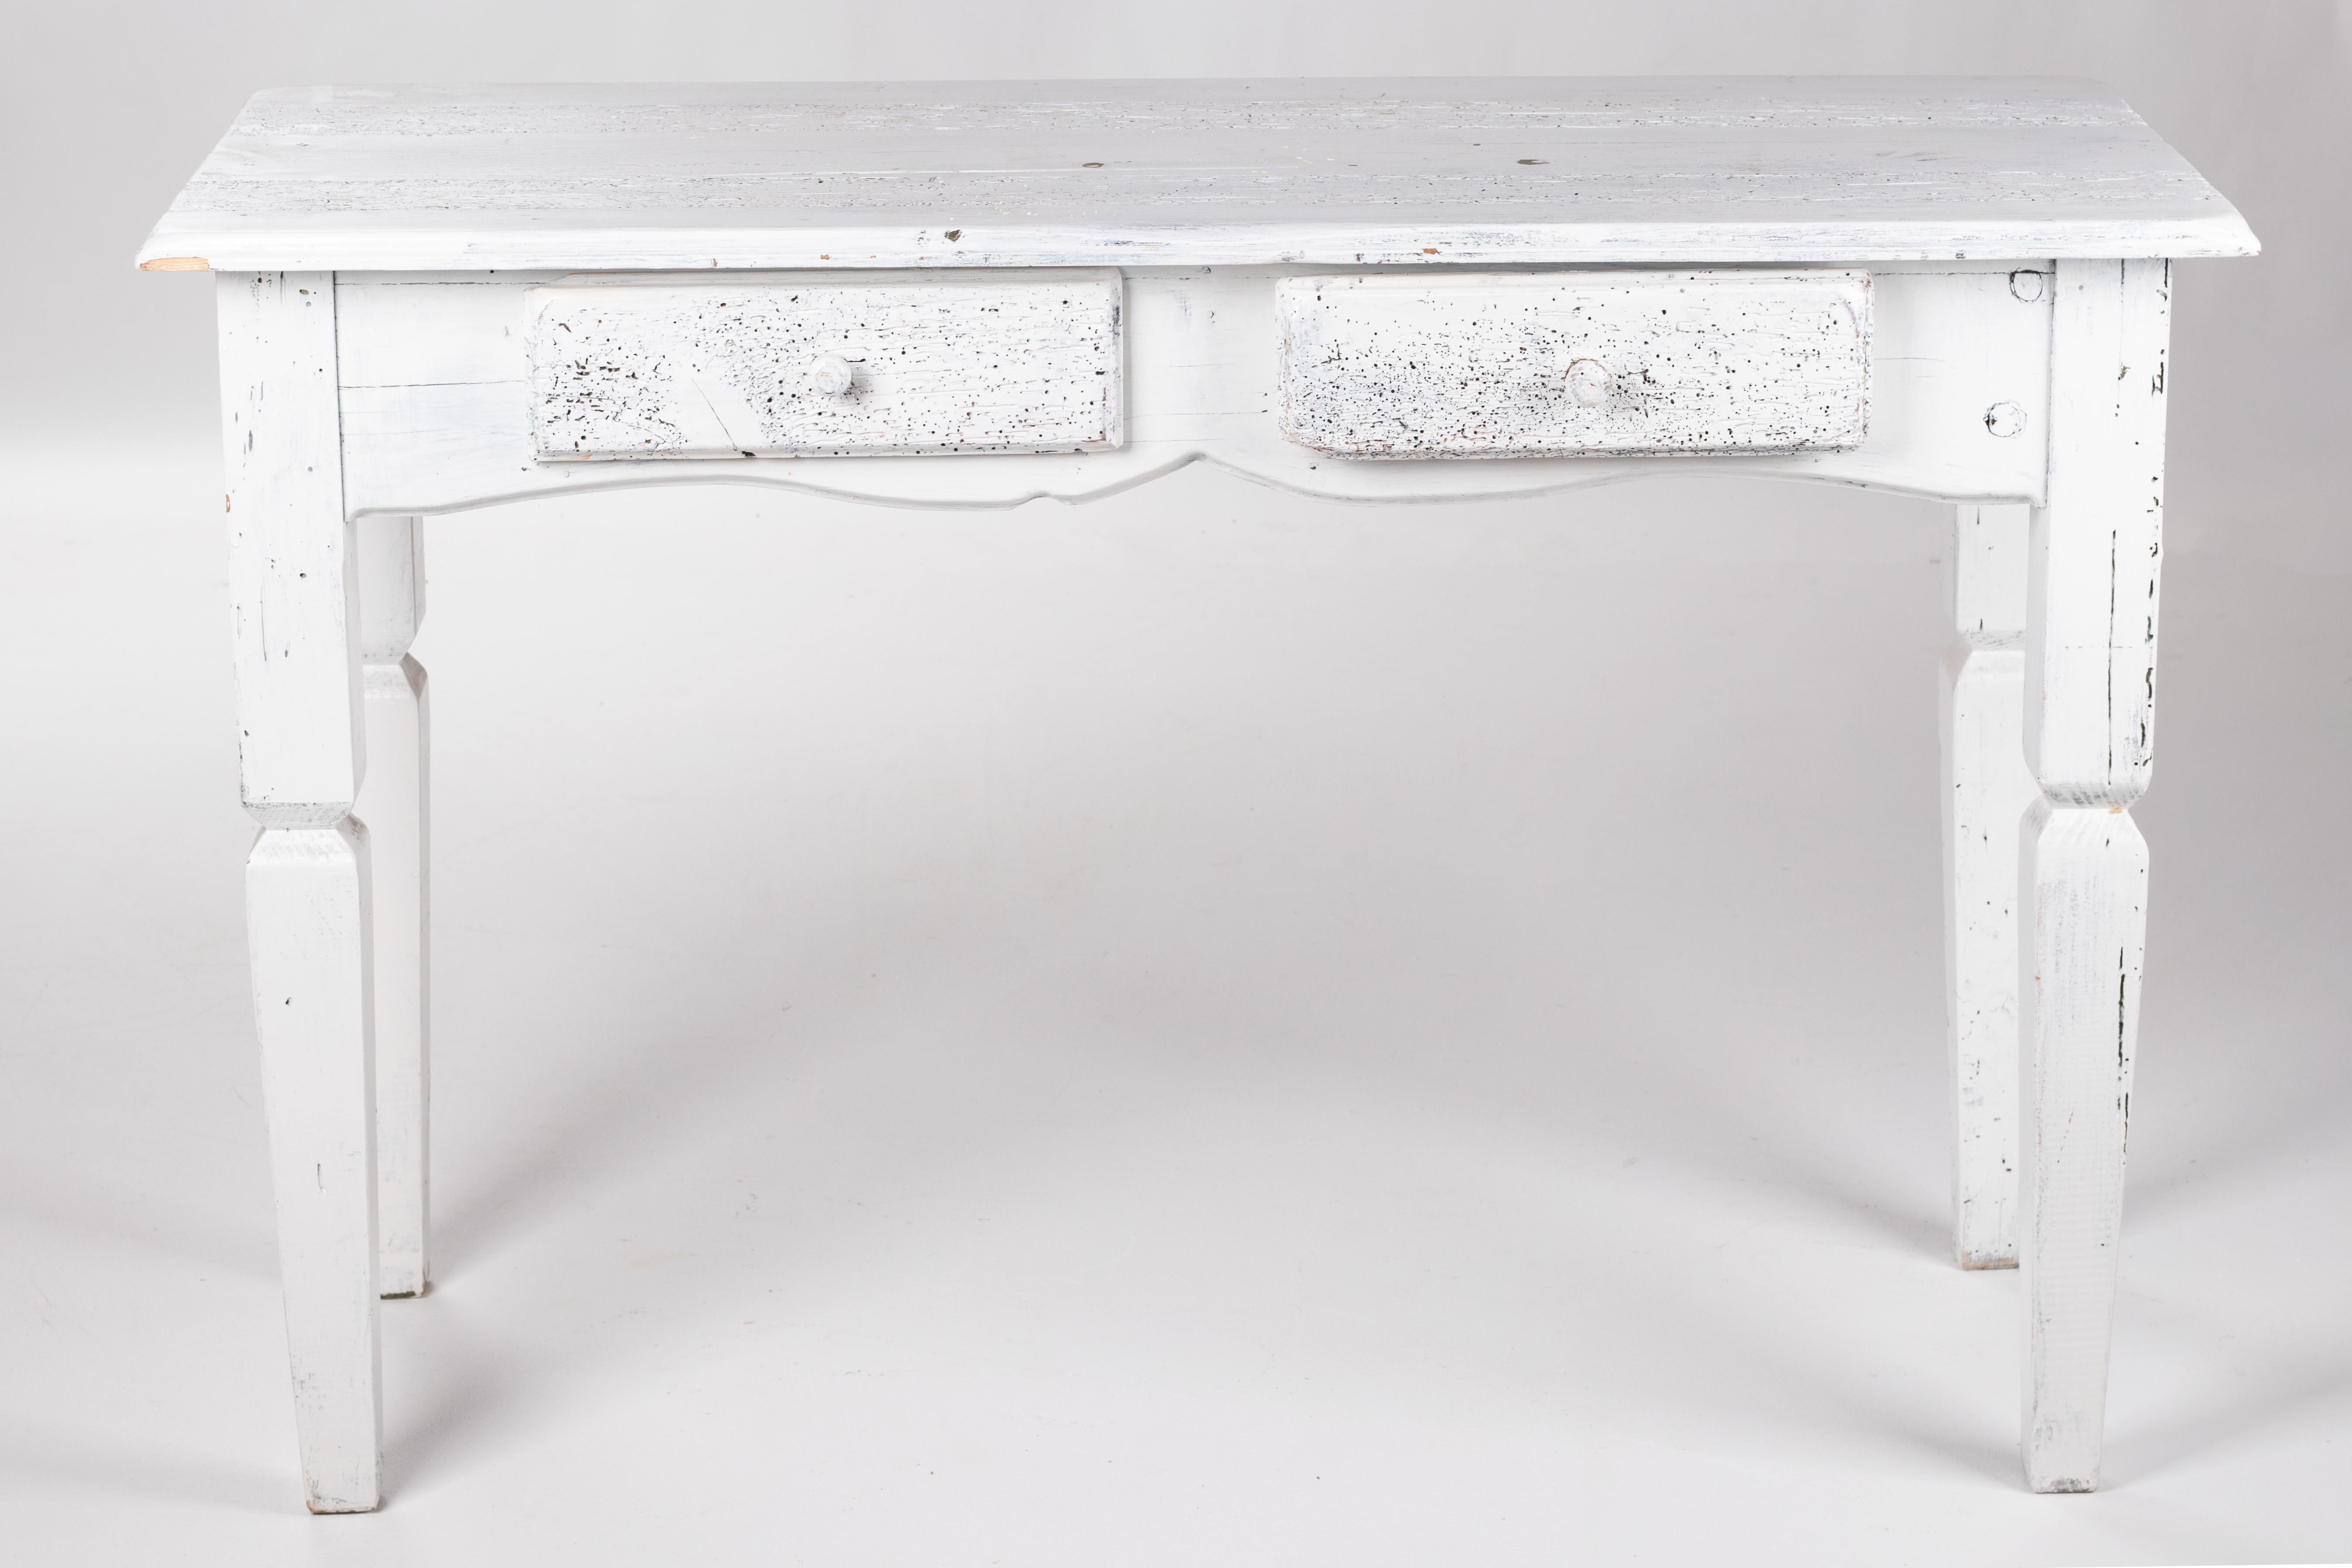 Rustic two-drawer French wooden table painted in white.